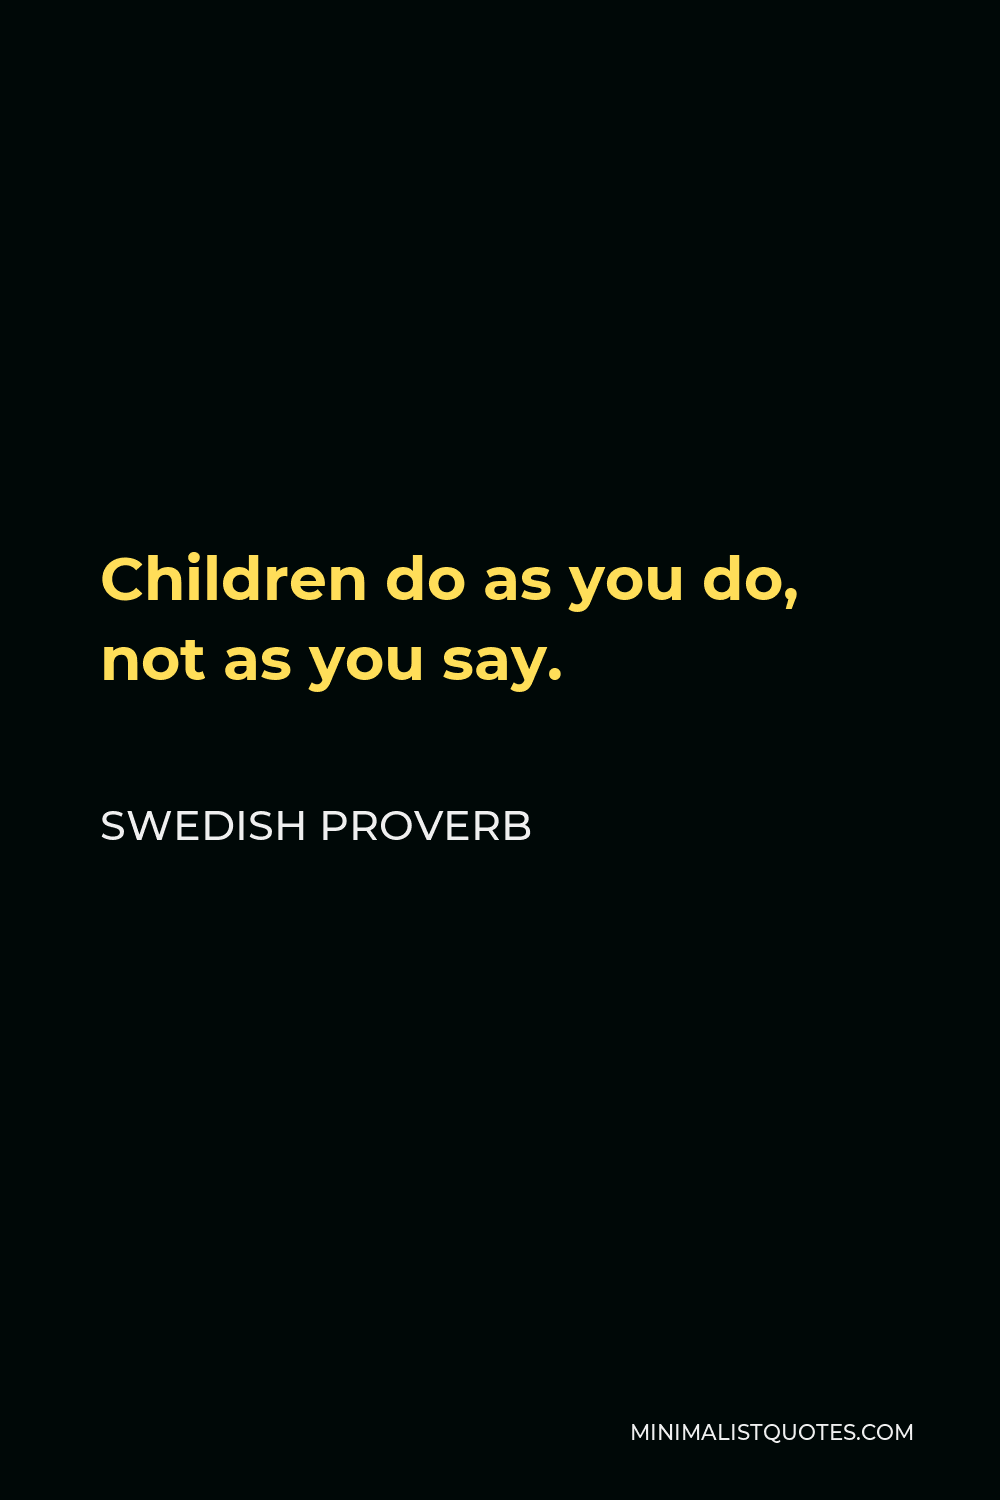 Swedish Proverb Quote - Children do as you do, not as you say.